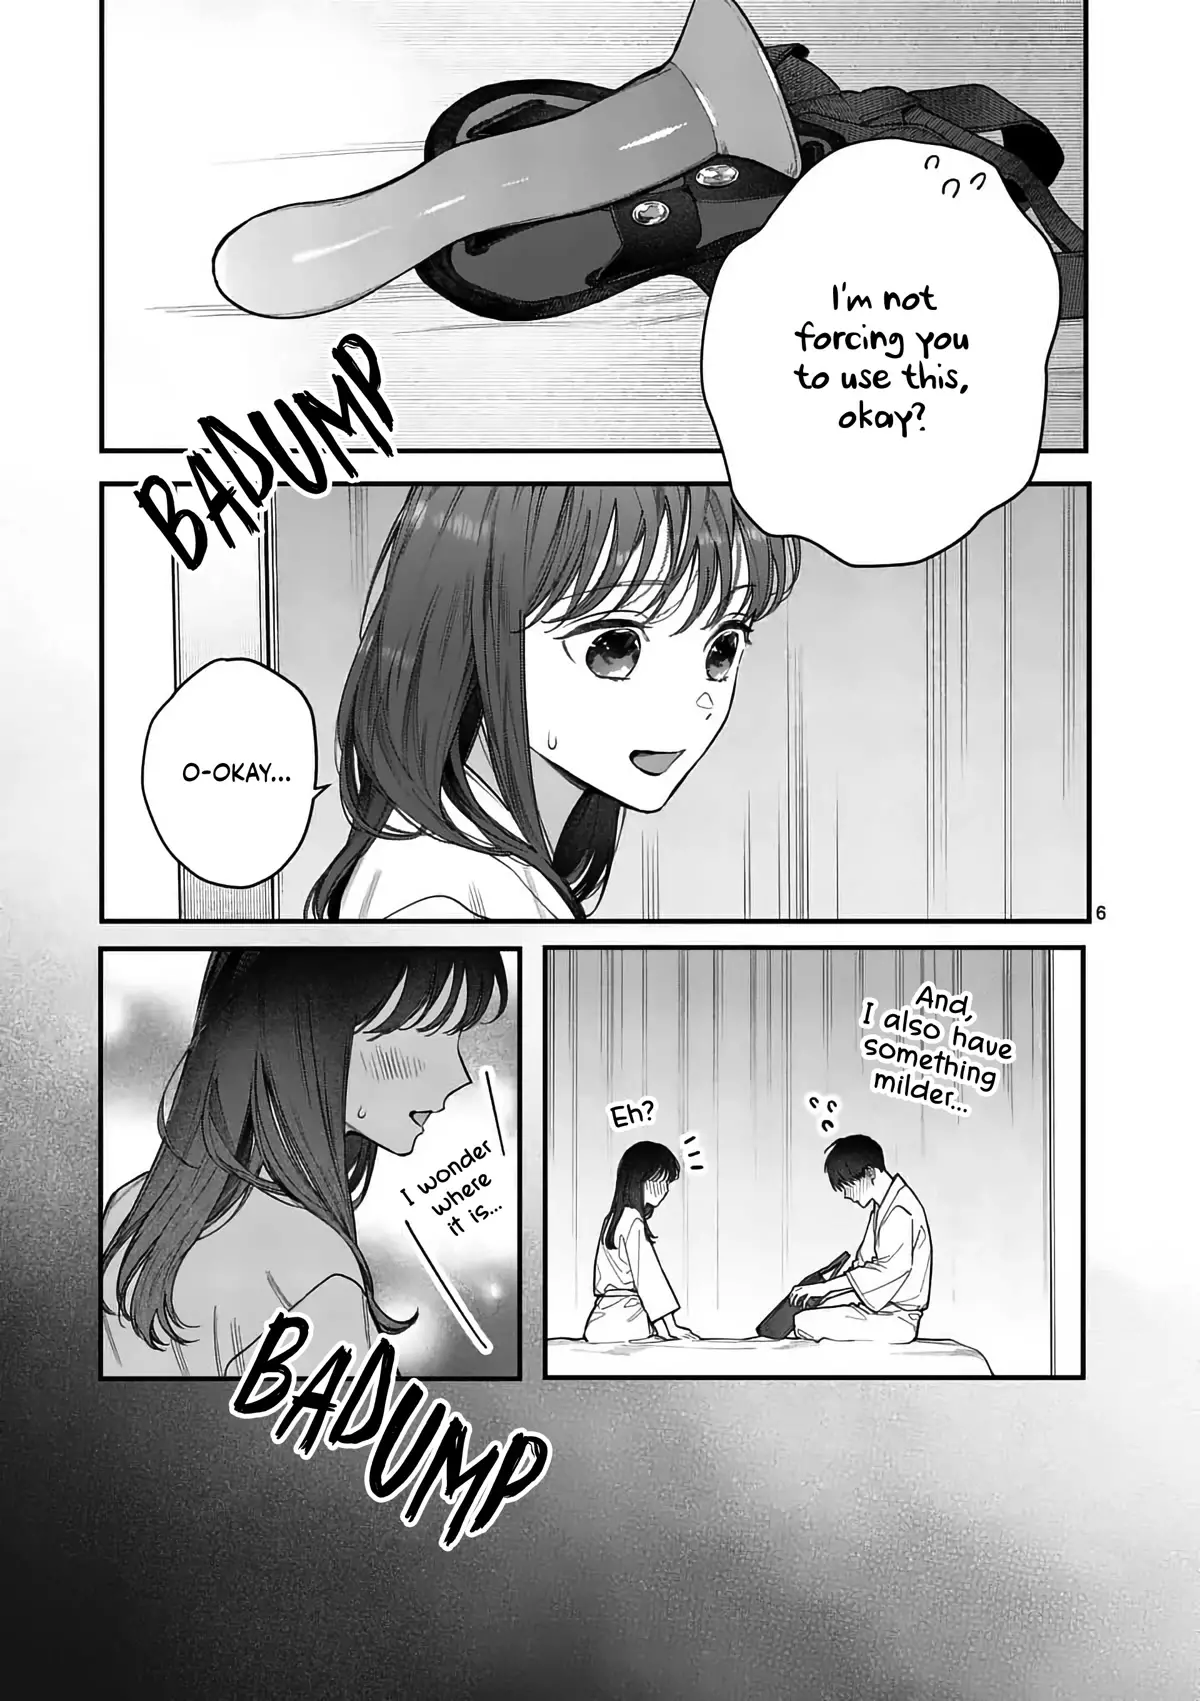 Is It Wrong To Get Done By A Girl? - 14 page 7-9845d659